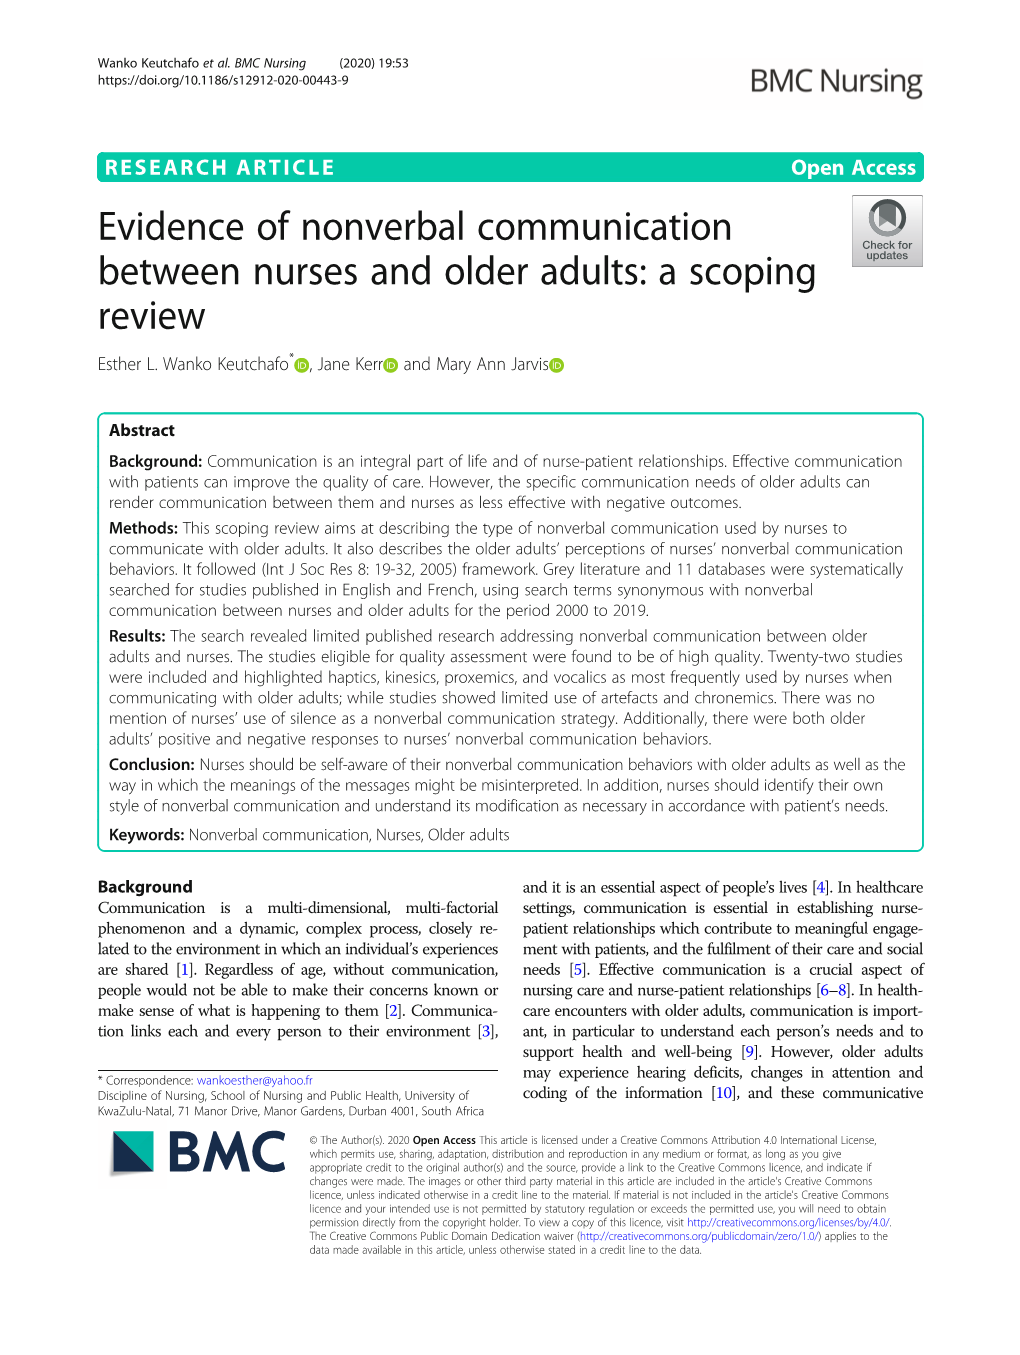 Evidence of Nonverbal Communication Between Nurses and Older Adults: a Scoping Review Esther L